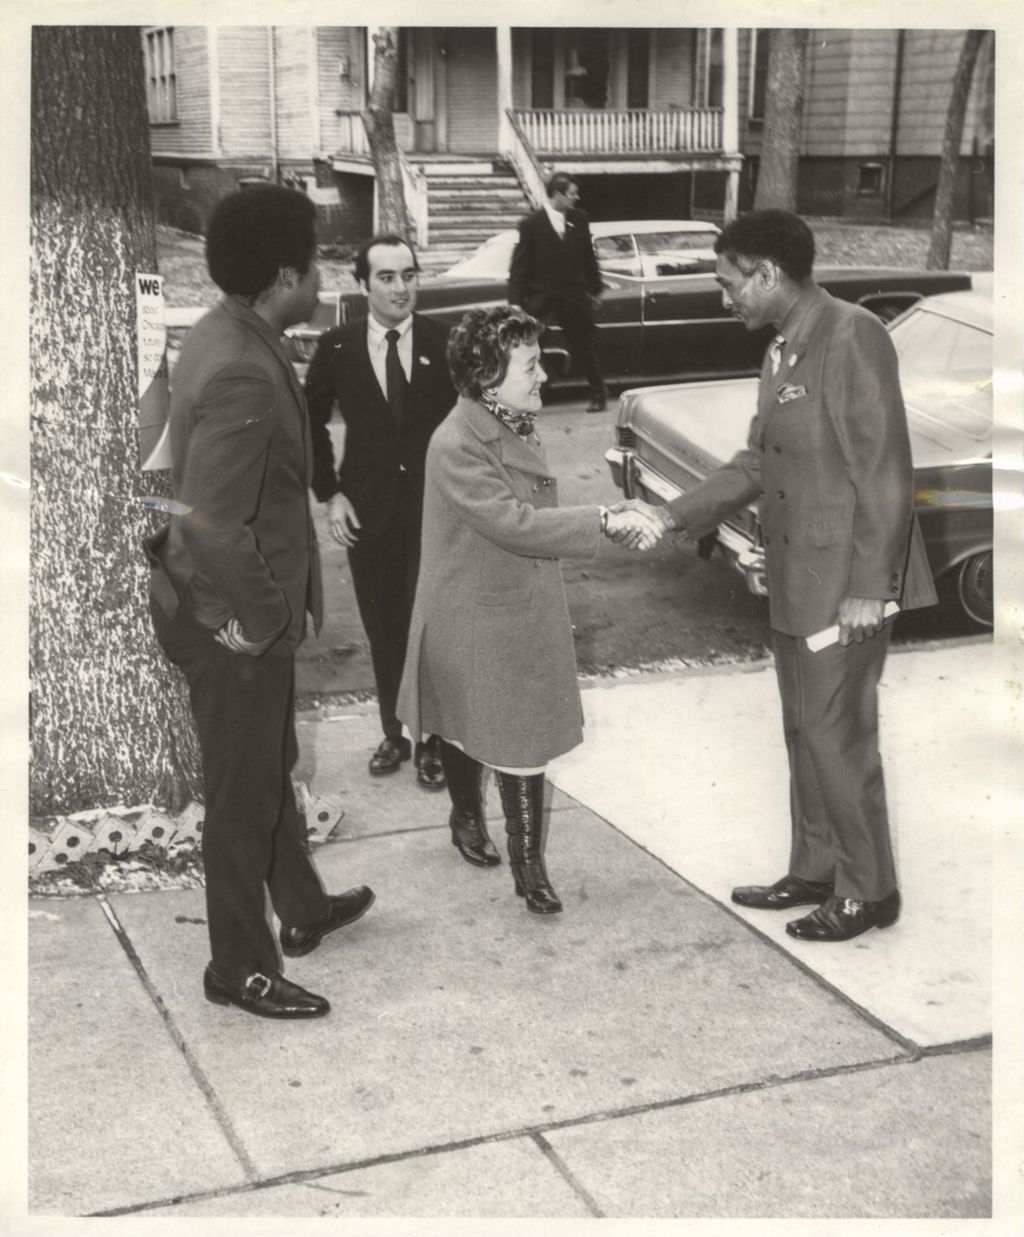 Miniature of Eleanor Daley shaking hands with a man during the "We Care" campaign